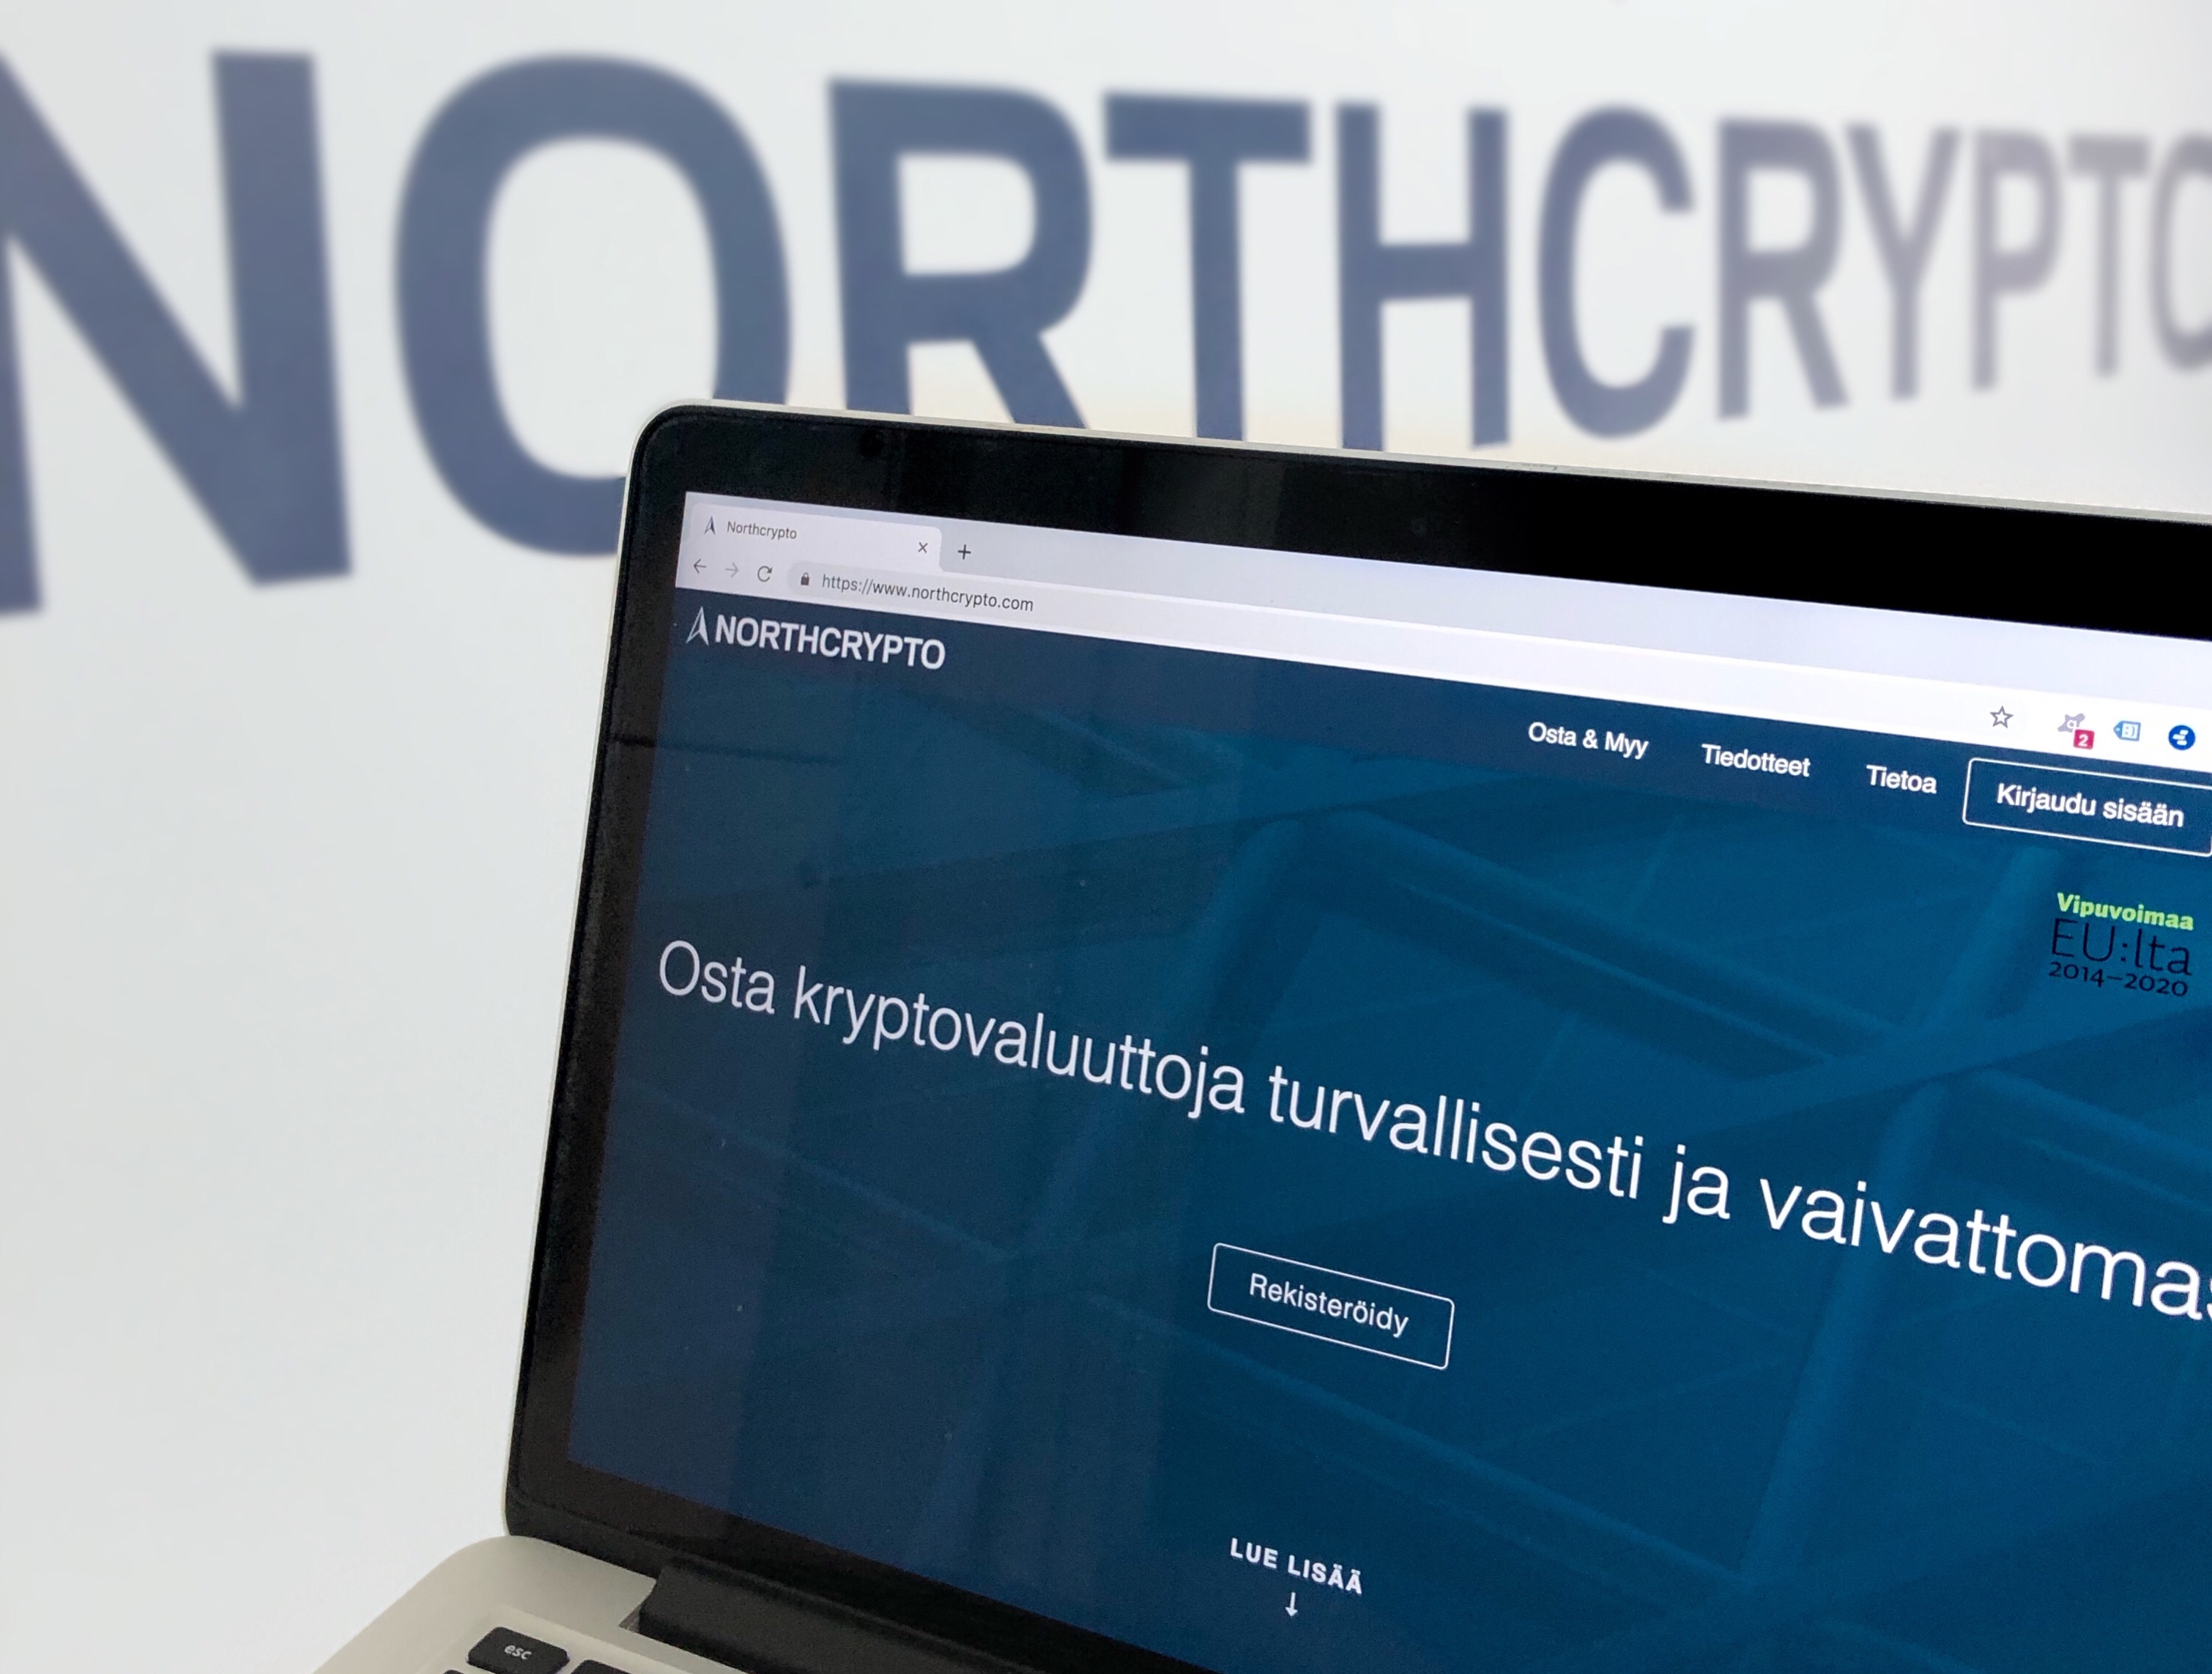 Northcrypto launches with the support of the EU